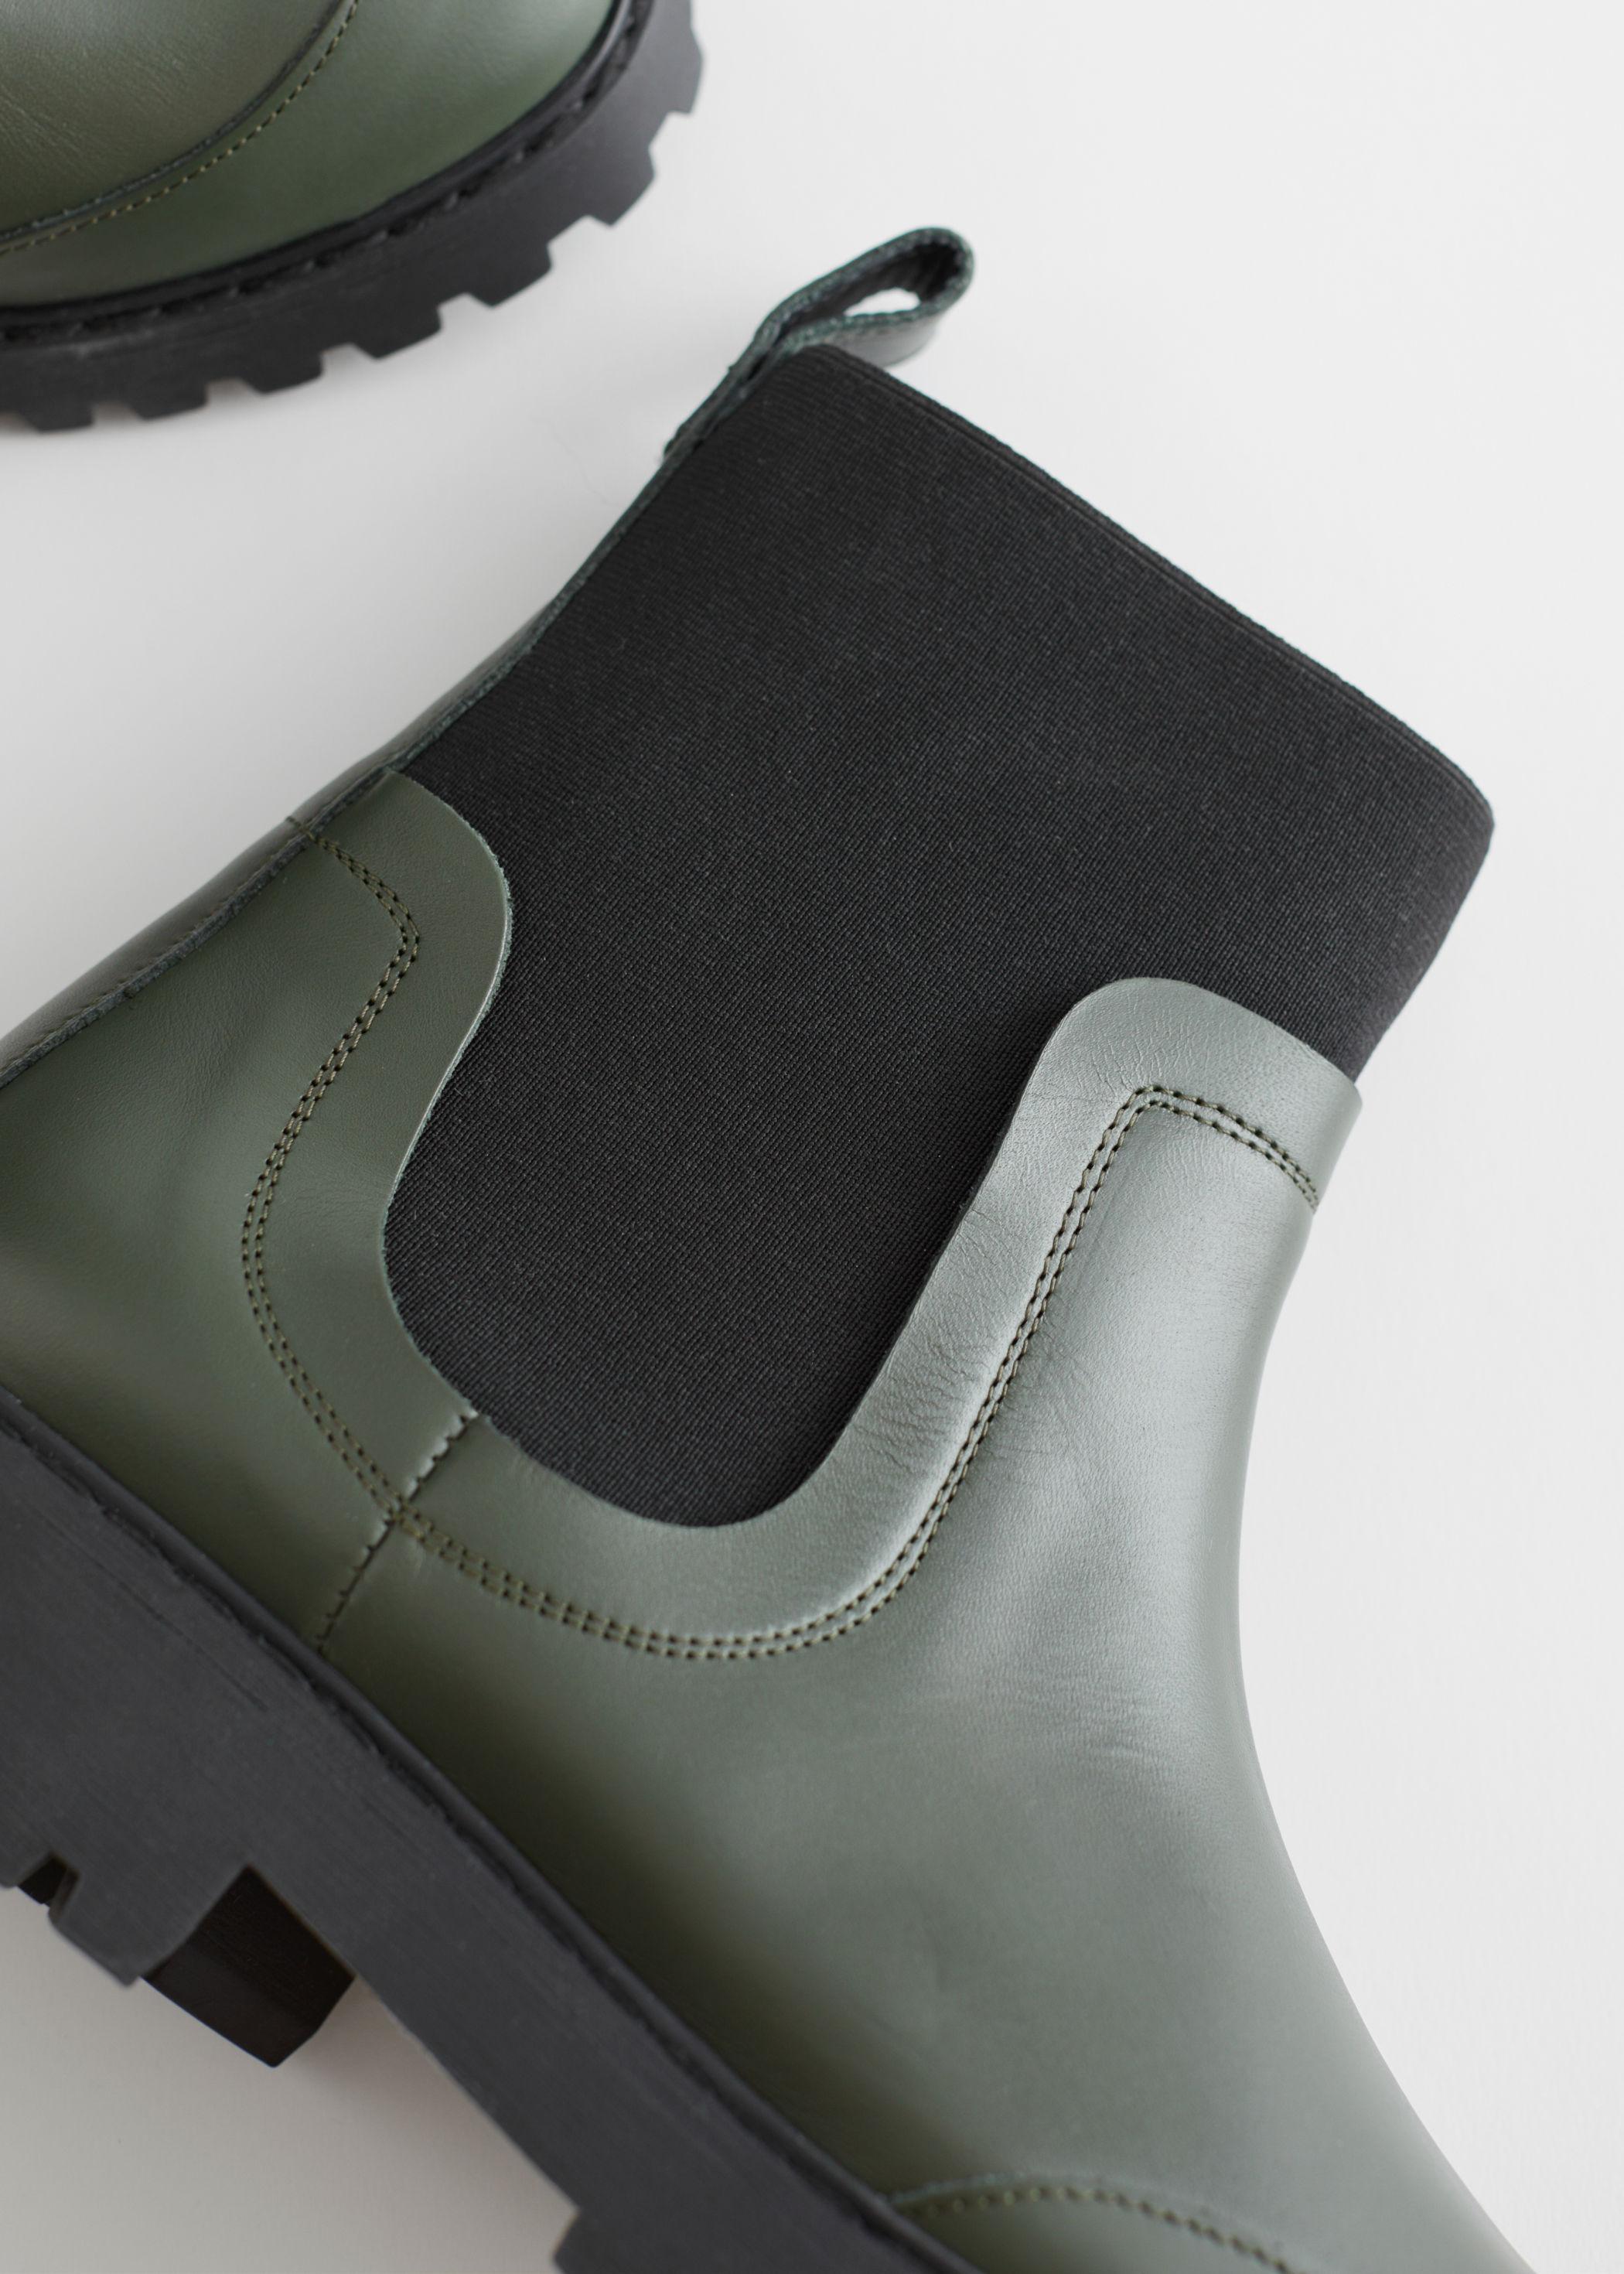 & Other Stories Elasticated Leather Chelsea Boots in Green - Lyst